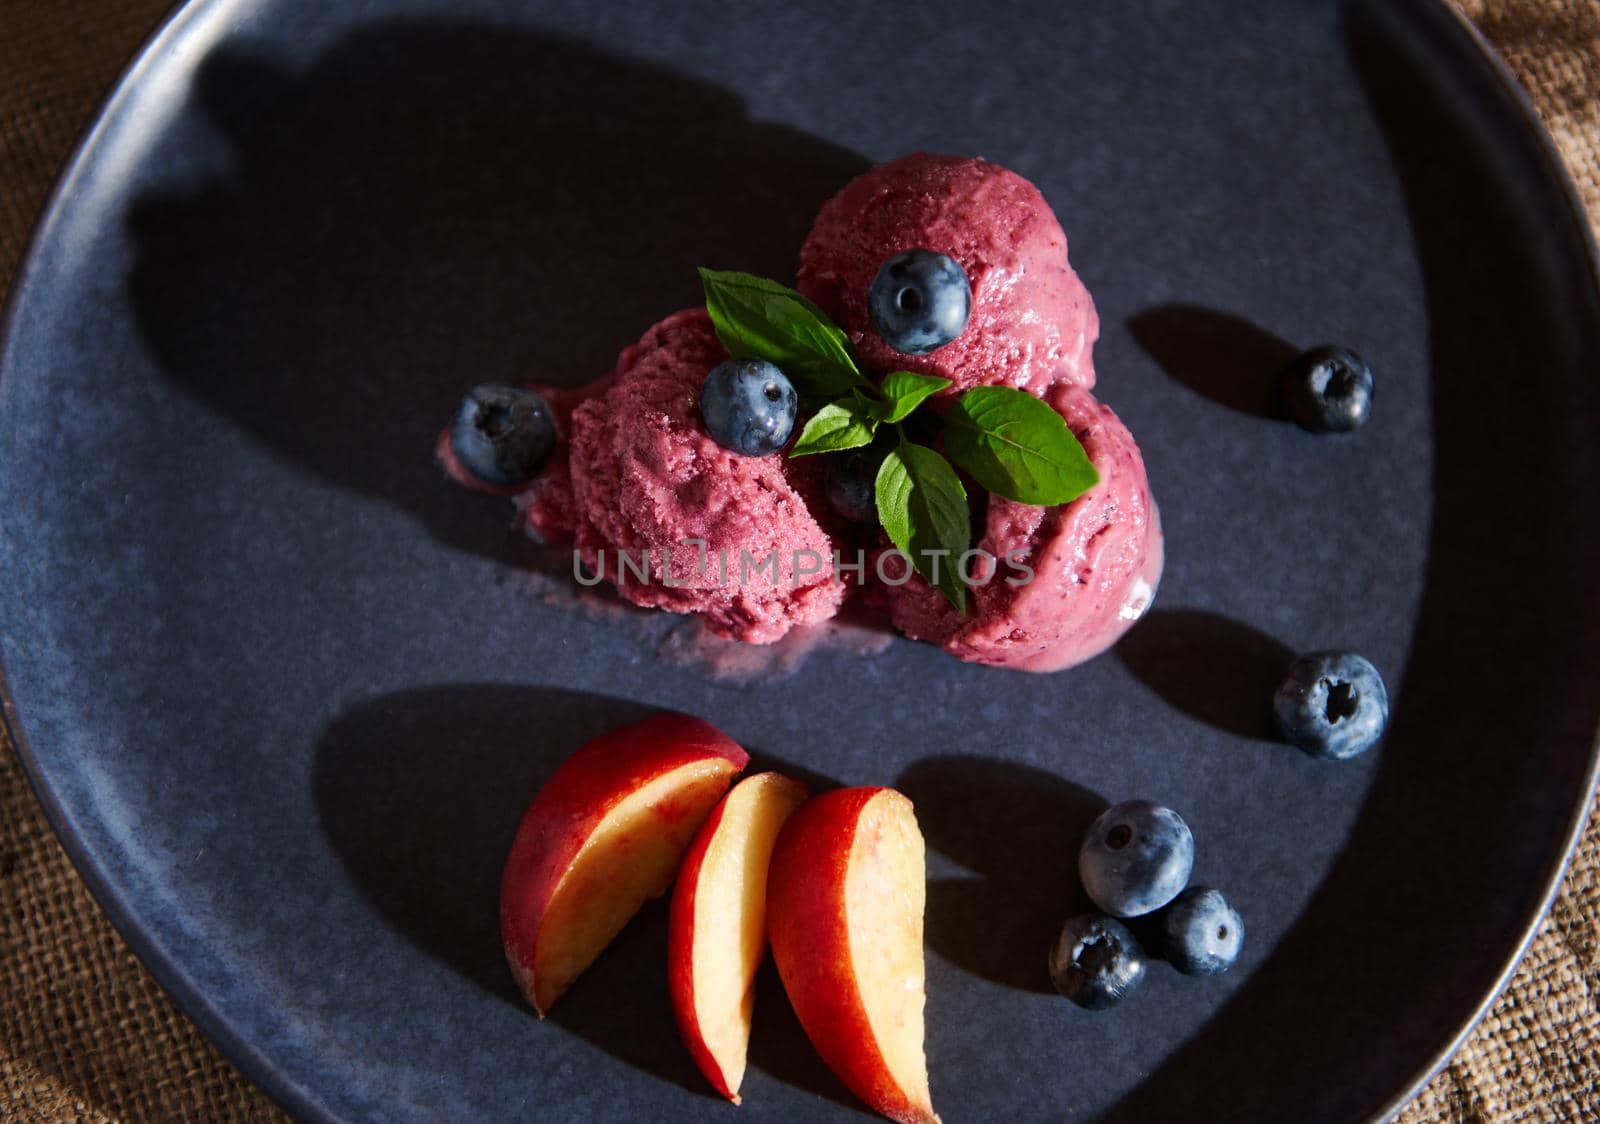 Food still life. Refreshing raw vegan huckleberry ice cream sorbet, melting on a navy blue plate, decorated with mint, lemon basil leaves, blueberries and ripe juicy peaches. Healthy homemade dessert